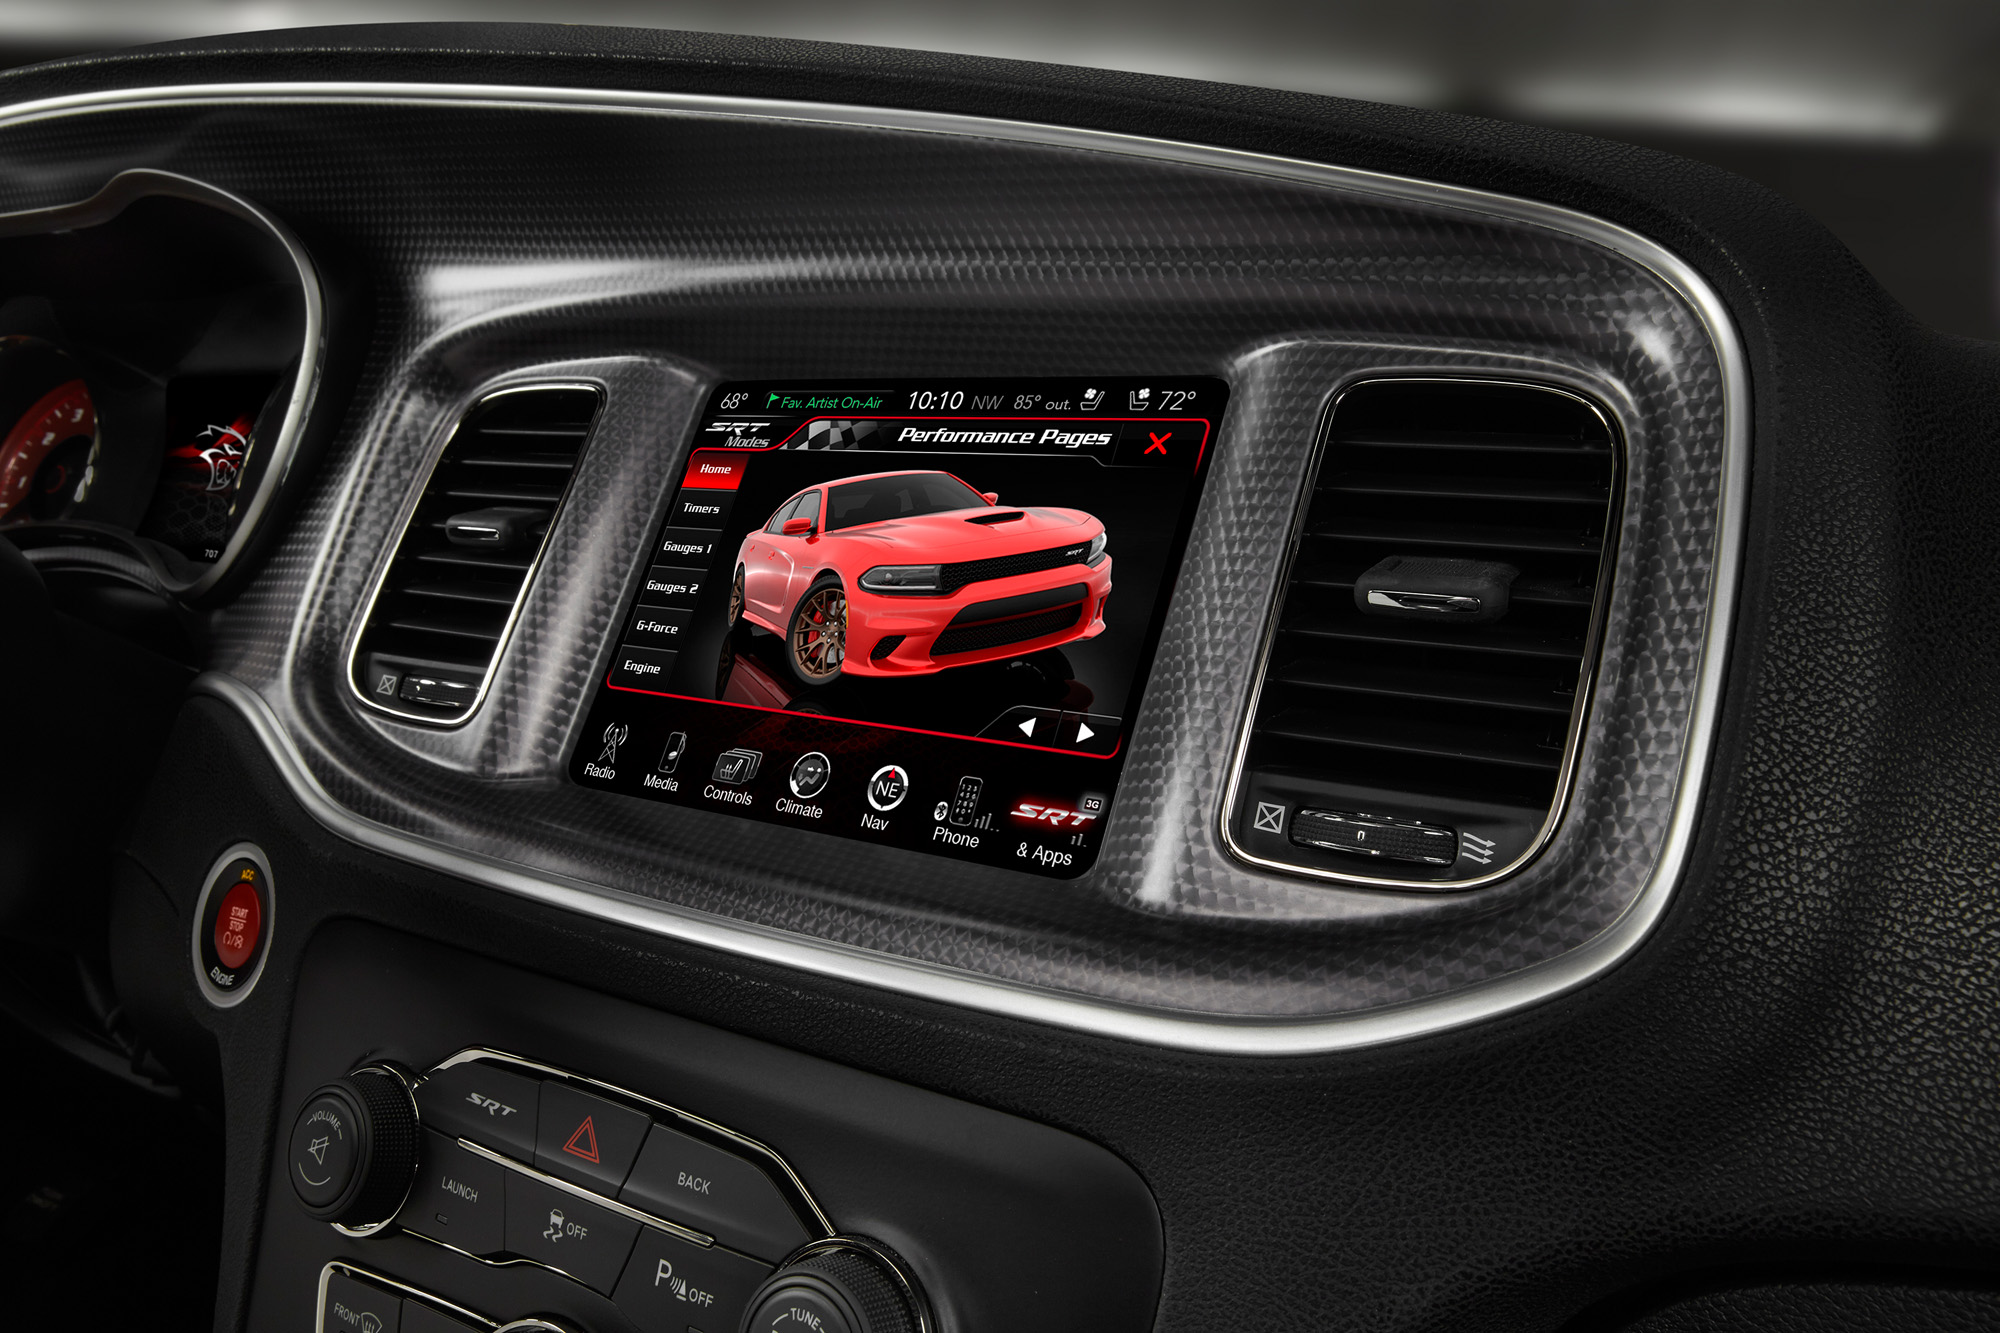 2015 Dodge Charger SRT - Home screen